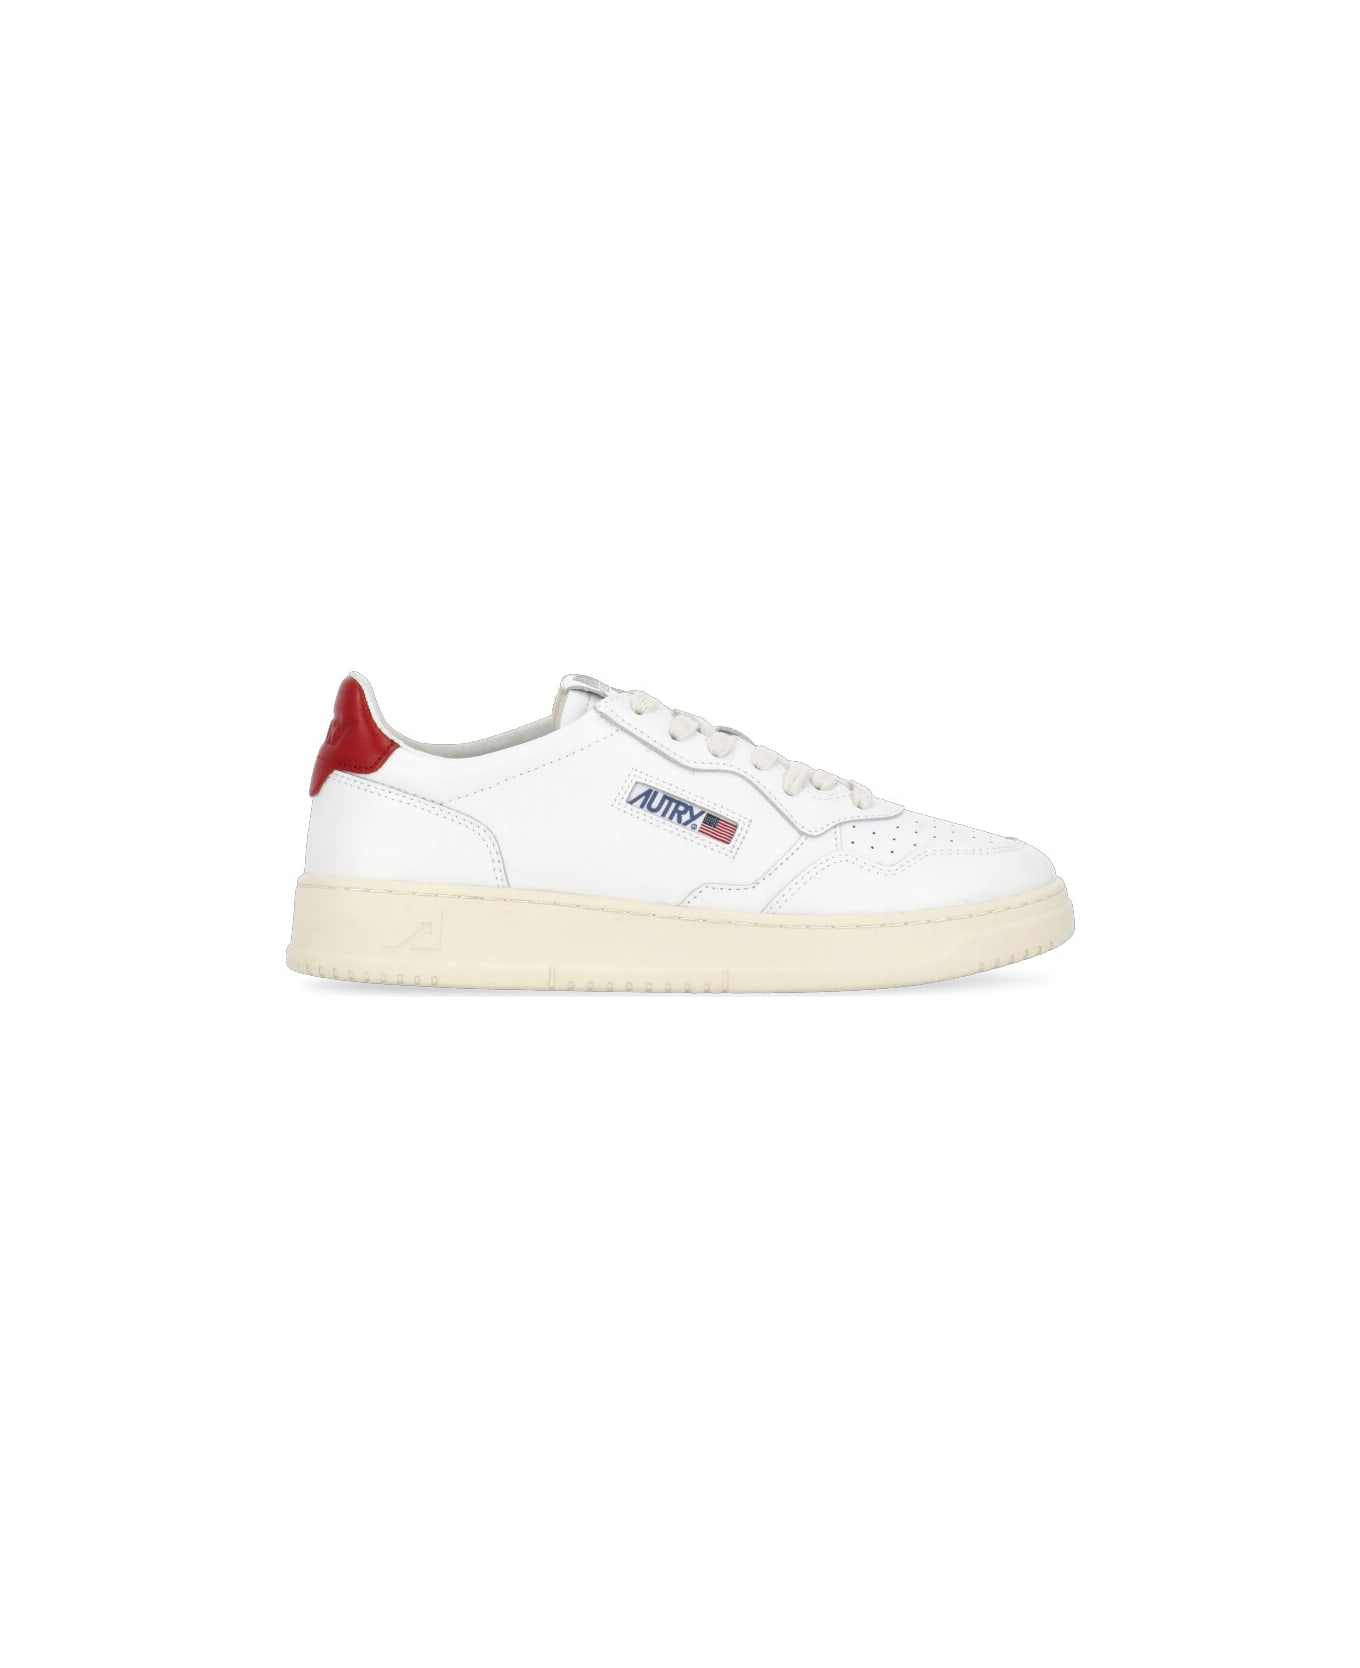 Autry Aulm Ll21 Sneakers - White スニーカー